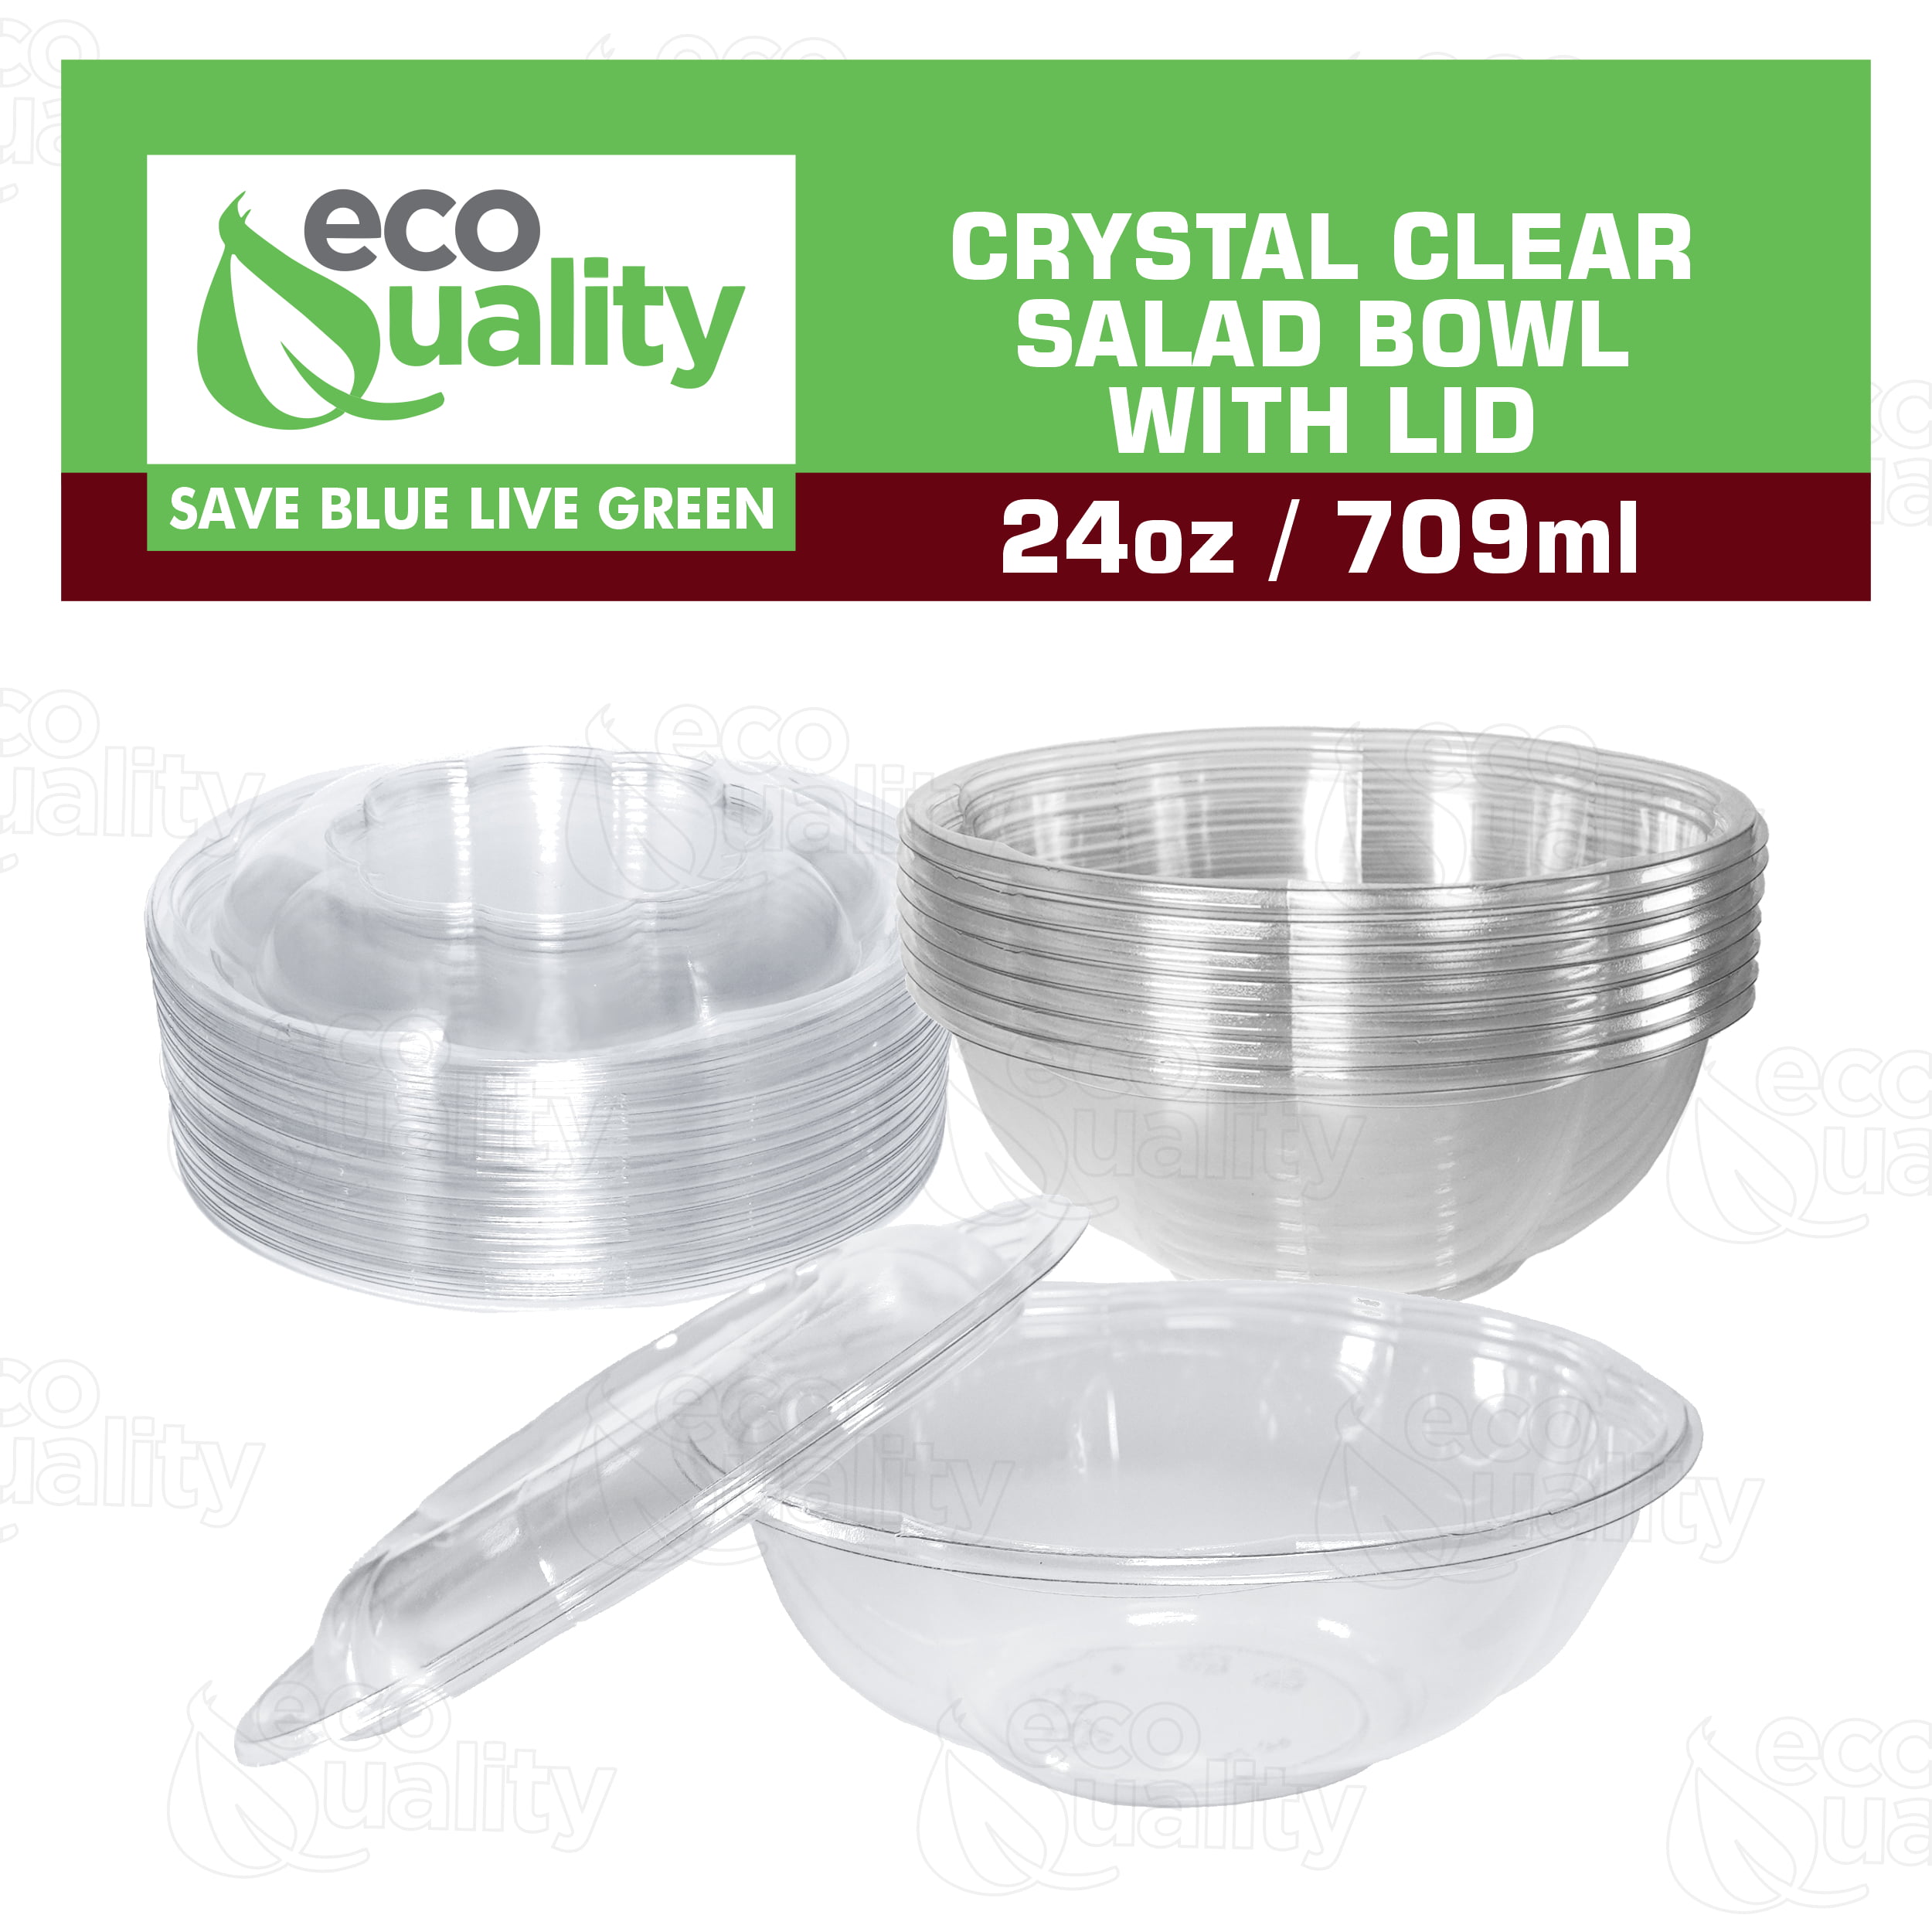 MT Products Plastic Small Salad or Acai Bowl with Lids 16 oz Crystal Clear  PET for Product Visibility Perfect for Travel (30 Pieces)